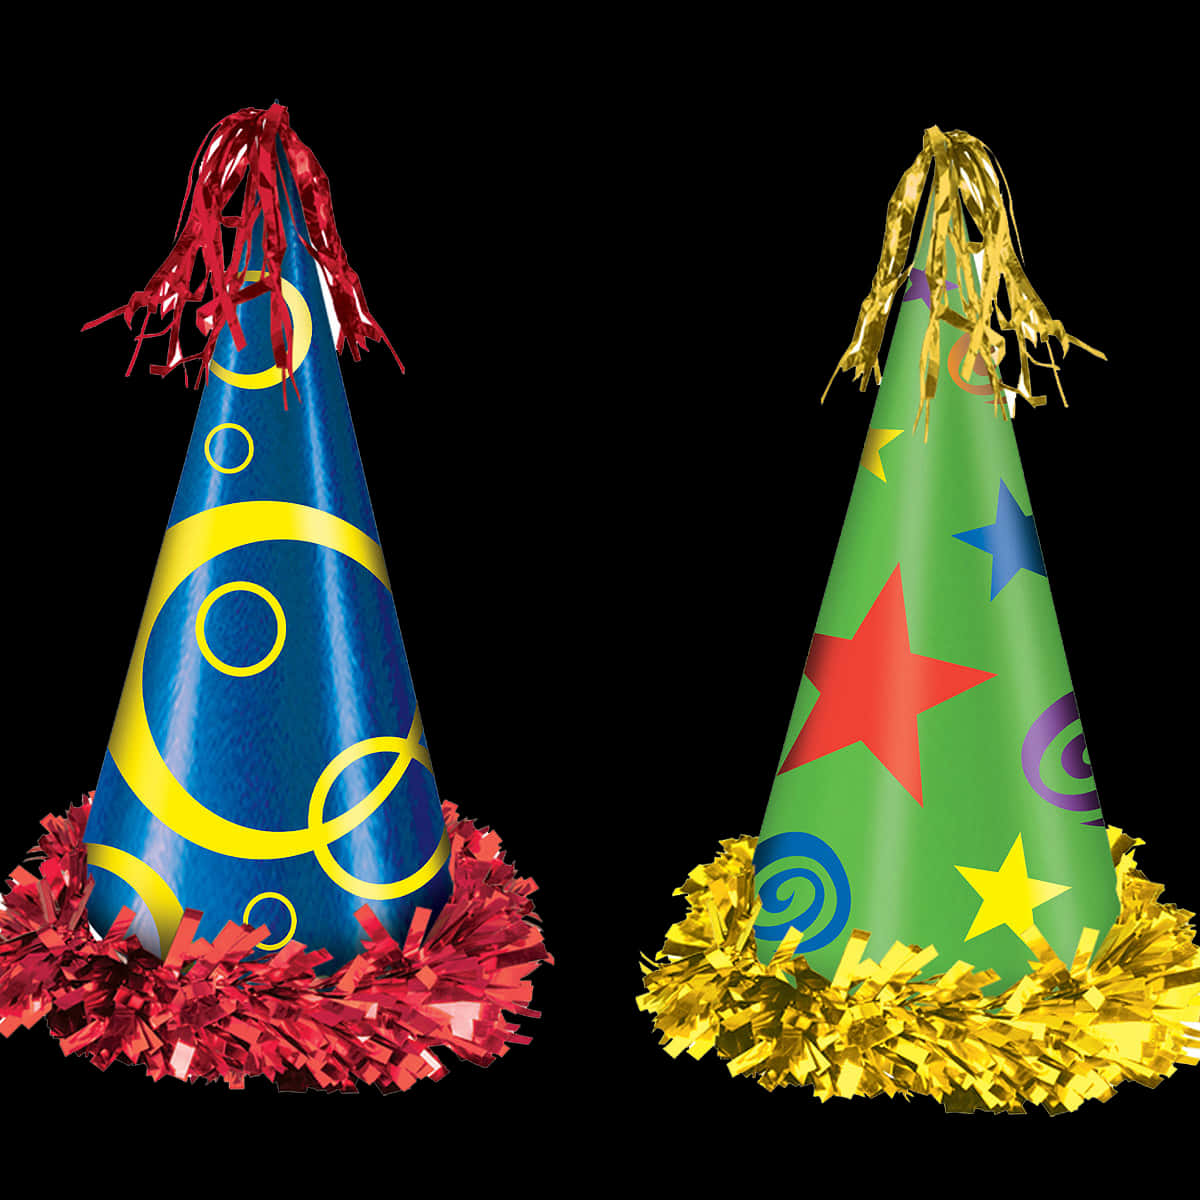 Colorful Party Hats Isolatedon Black